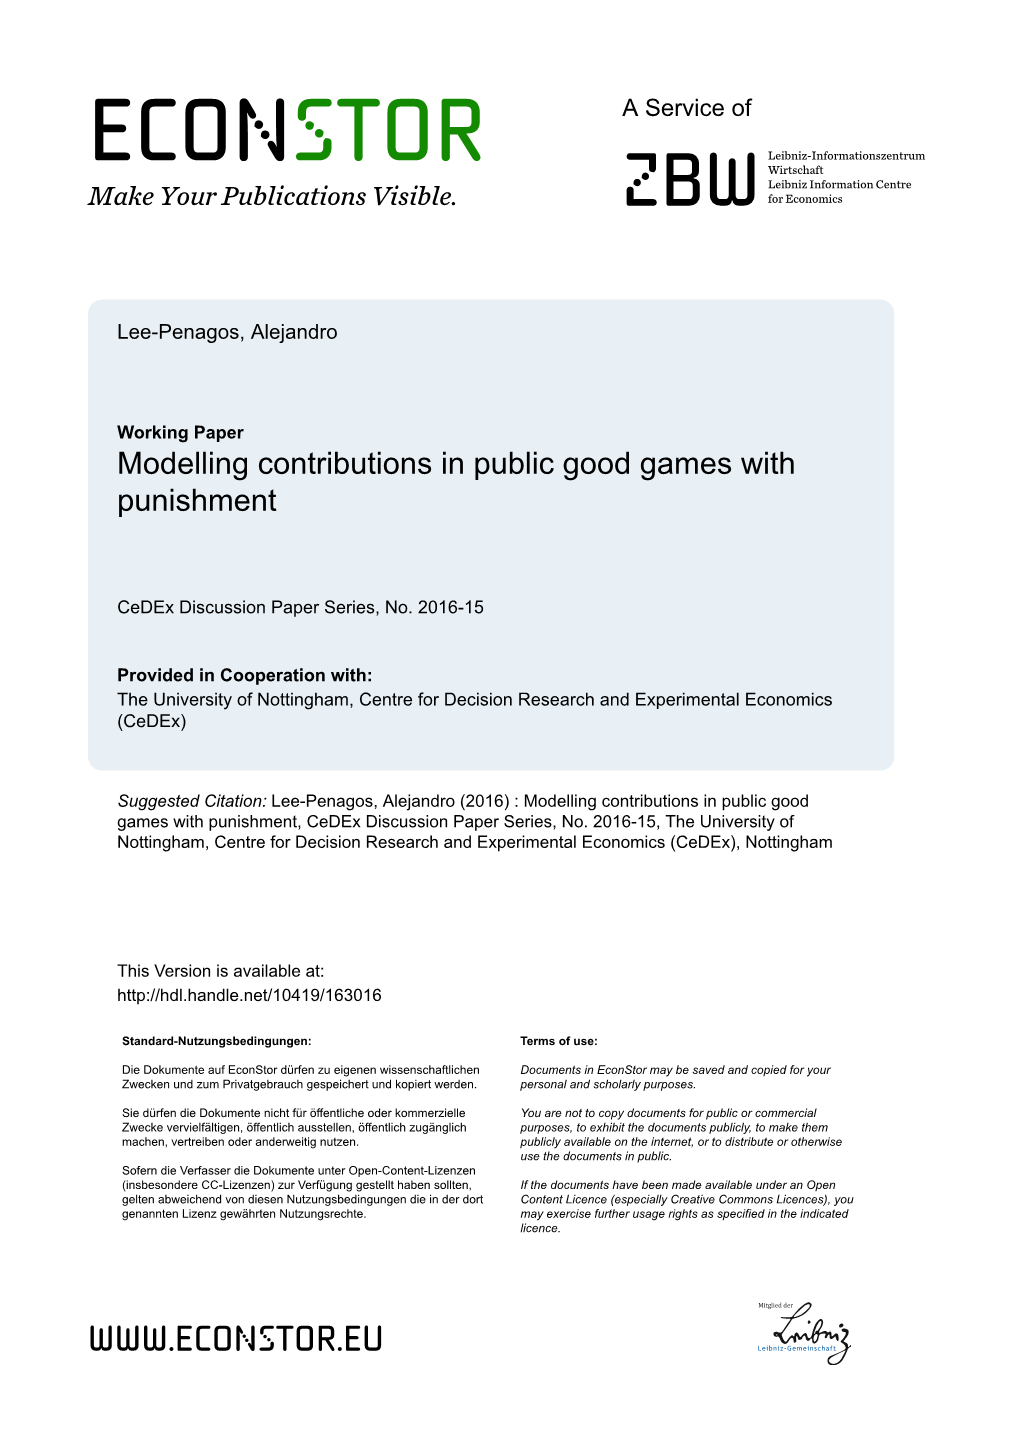 Modelling Contributions in Public Good Games with Punishment